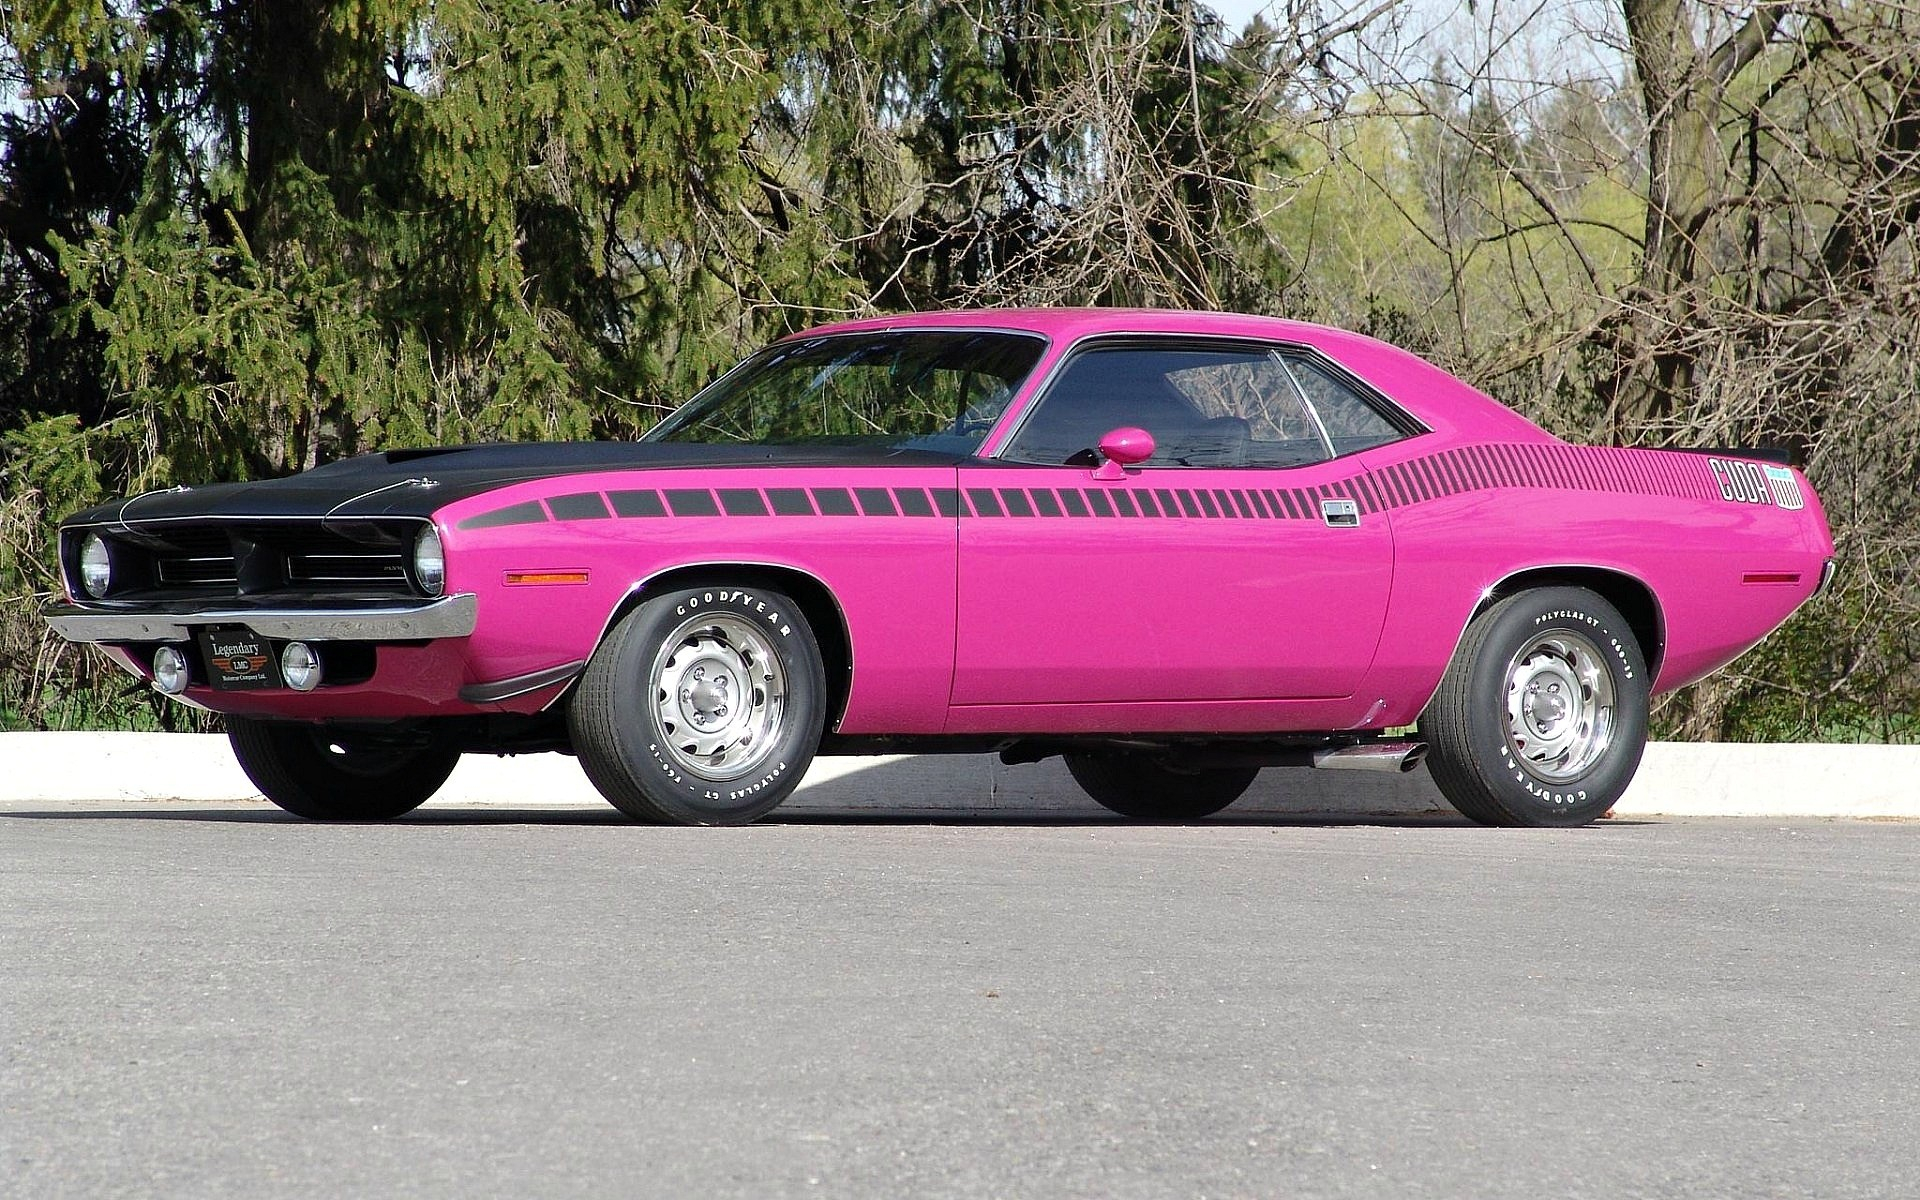 1920x1200 Wallpaper : sports car, pink, coupe, Plymouth Barracuda, 1970, land vehicle, automotive exterior, automobile make, compact car, muscle car, stock car racing, cuda 4kWallpaper 584646 HD Wallpapers